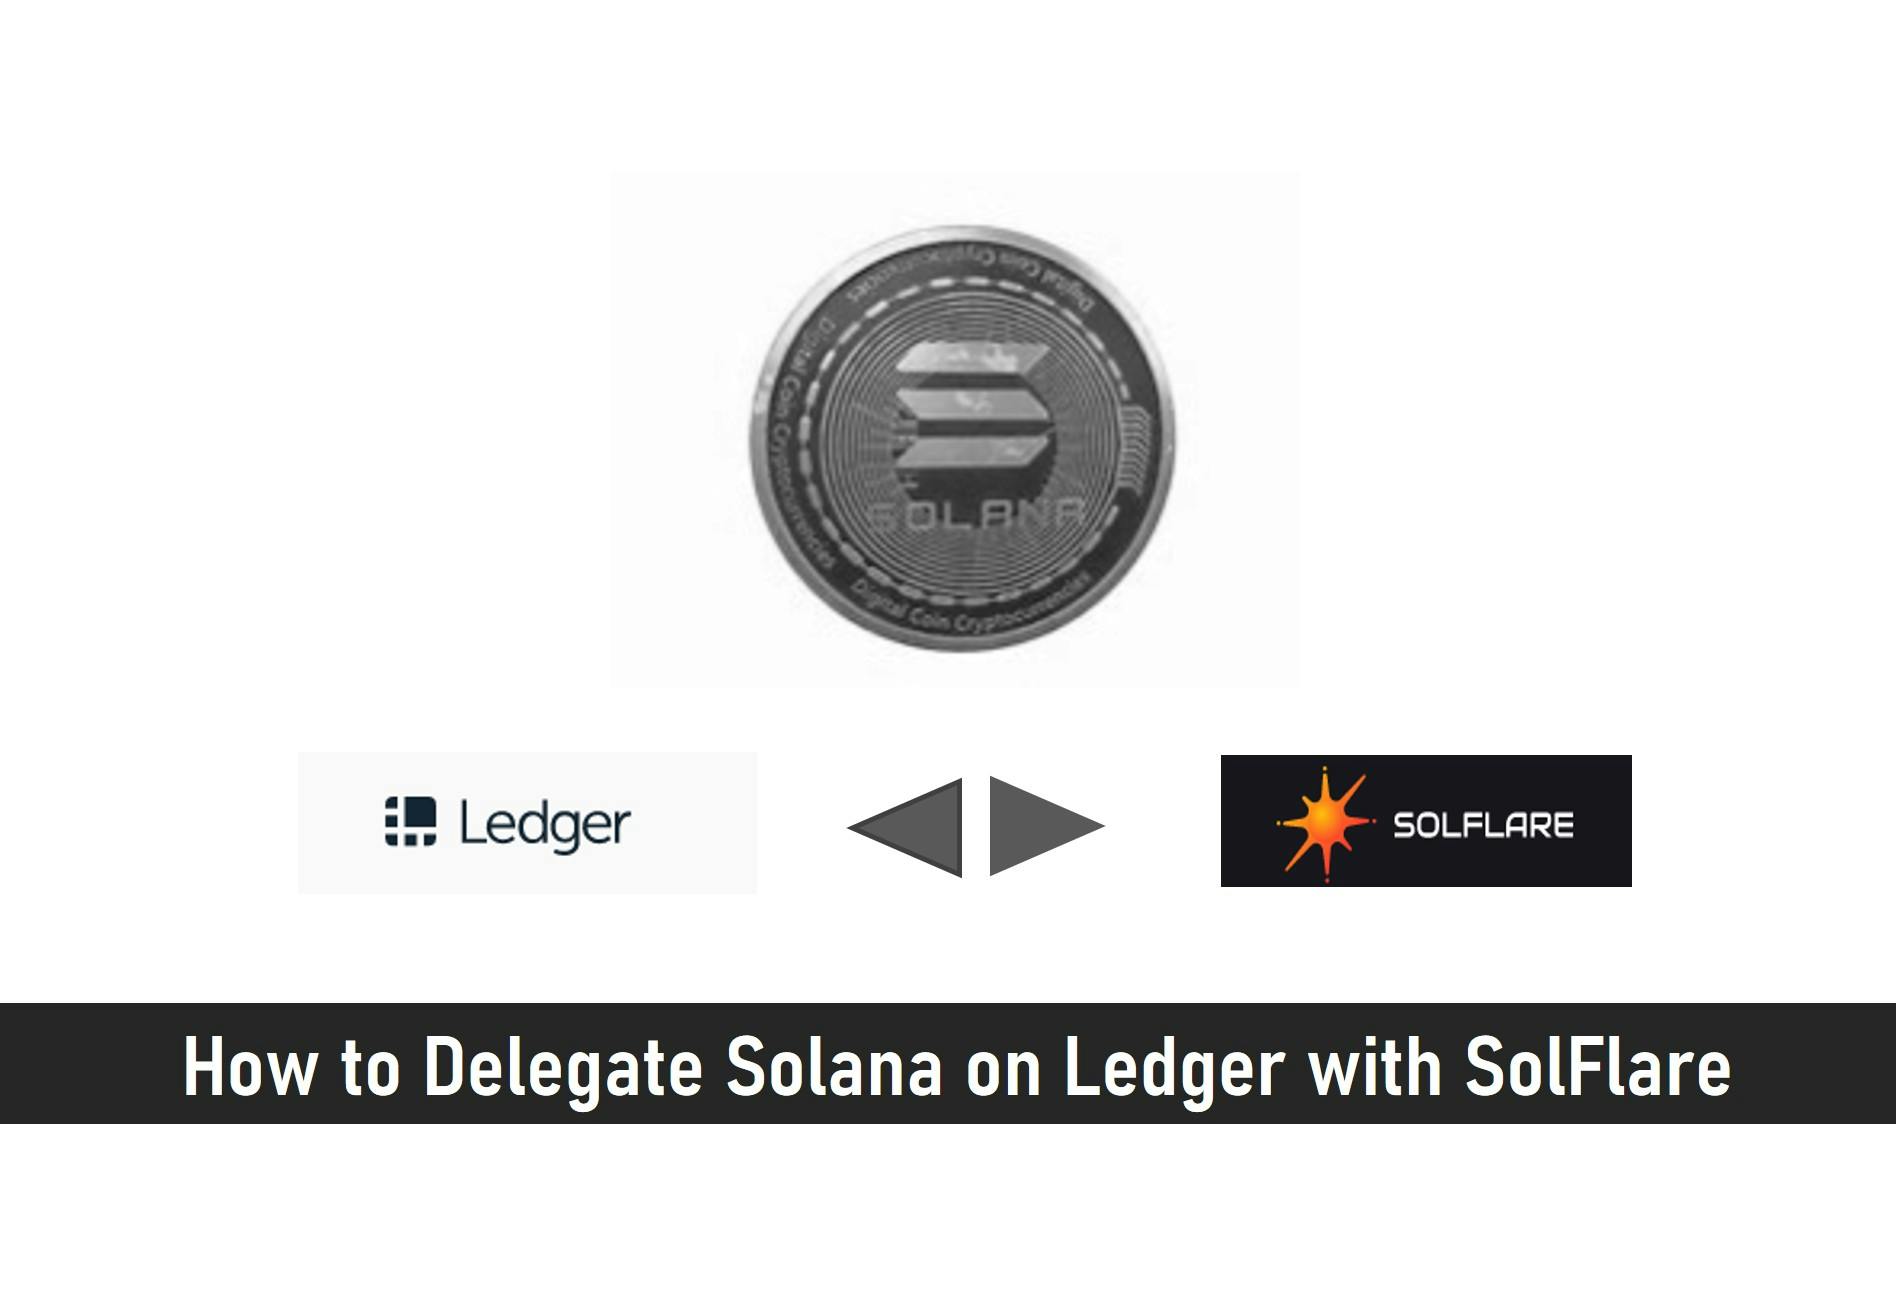 How to Delegate Solana on Ledger with SolFlare